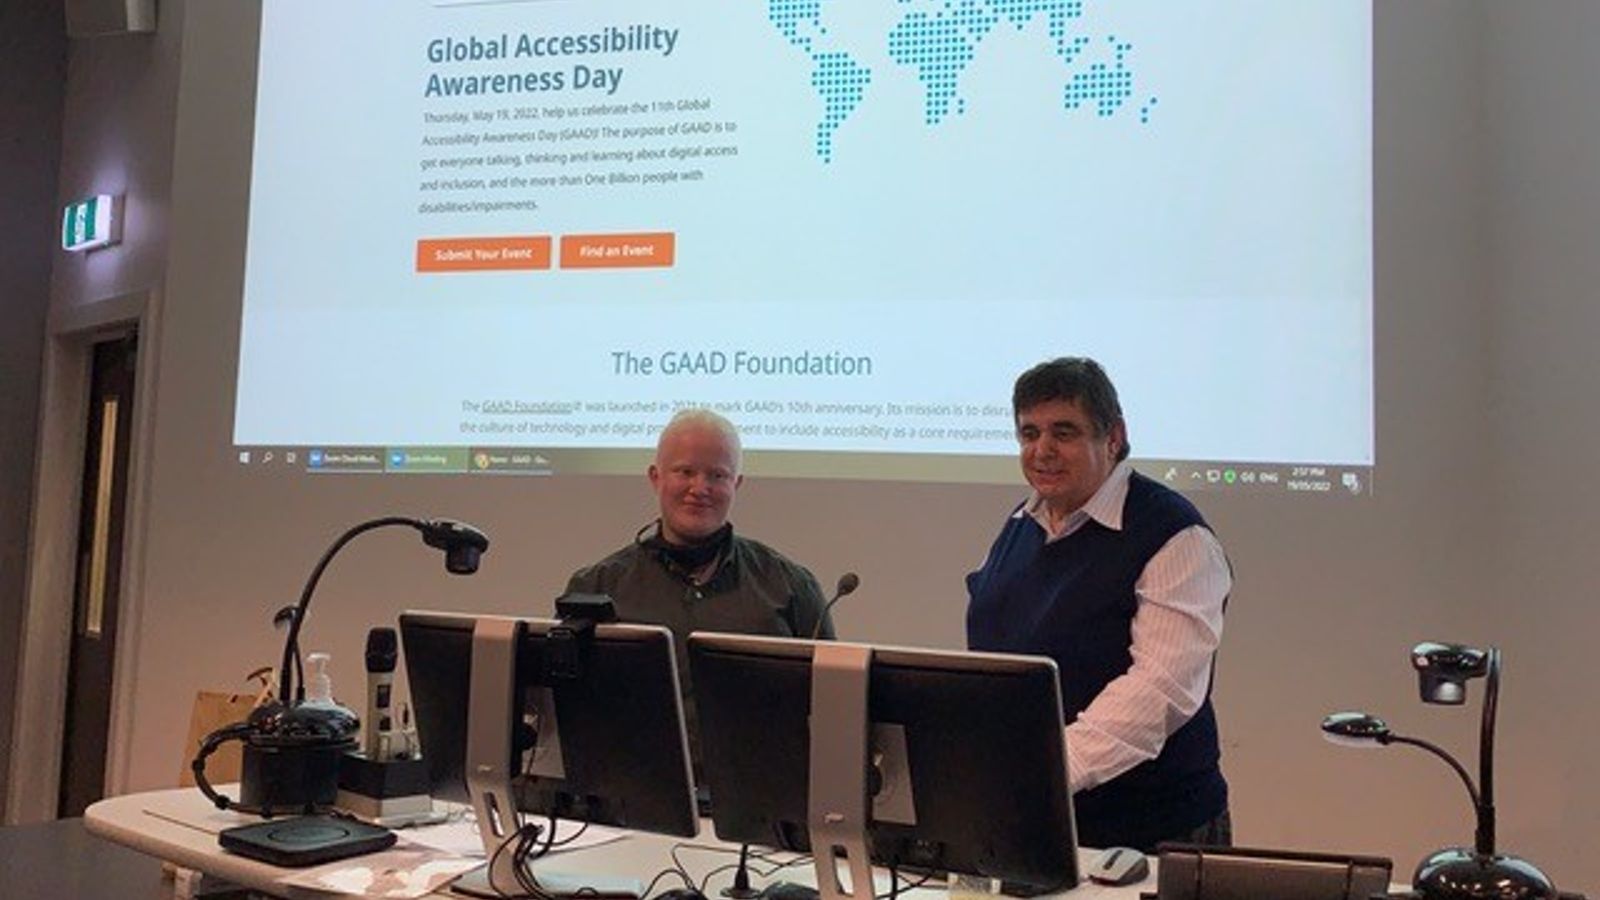 Bee Tapara and Thomas Bryan presenting the GAAD website on a projector during their guest lecture